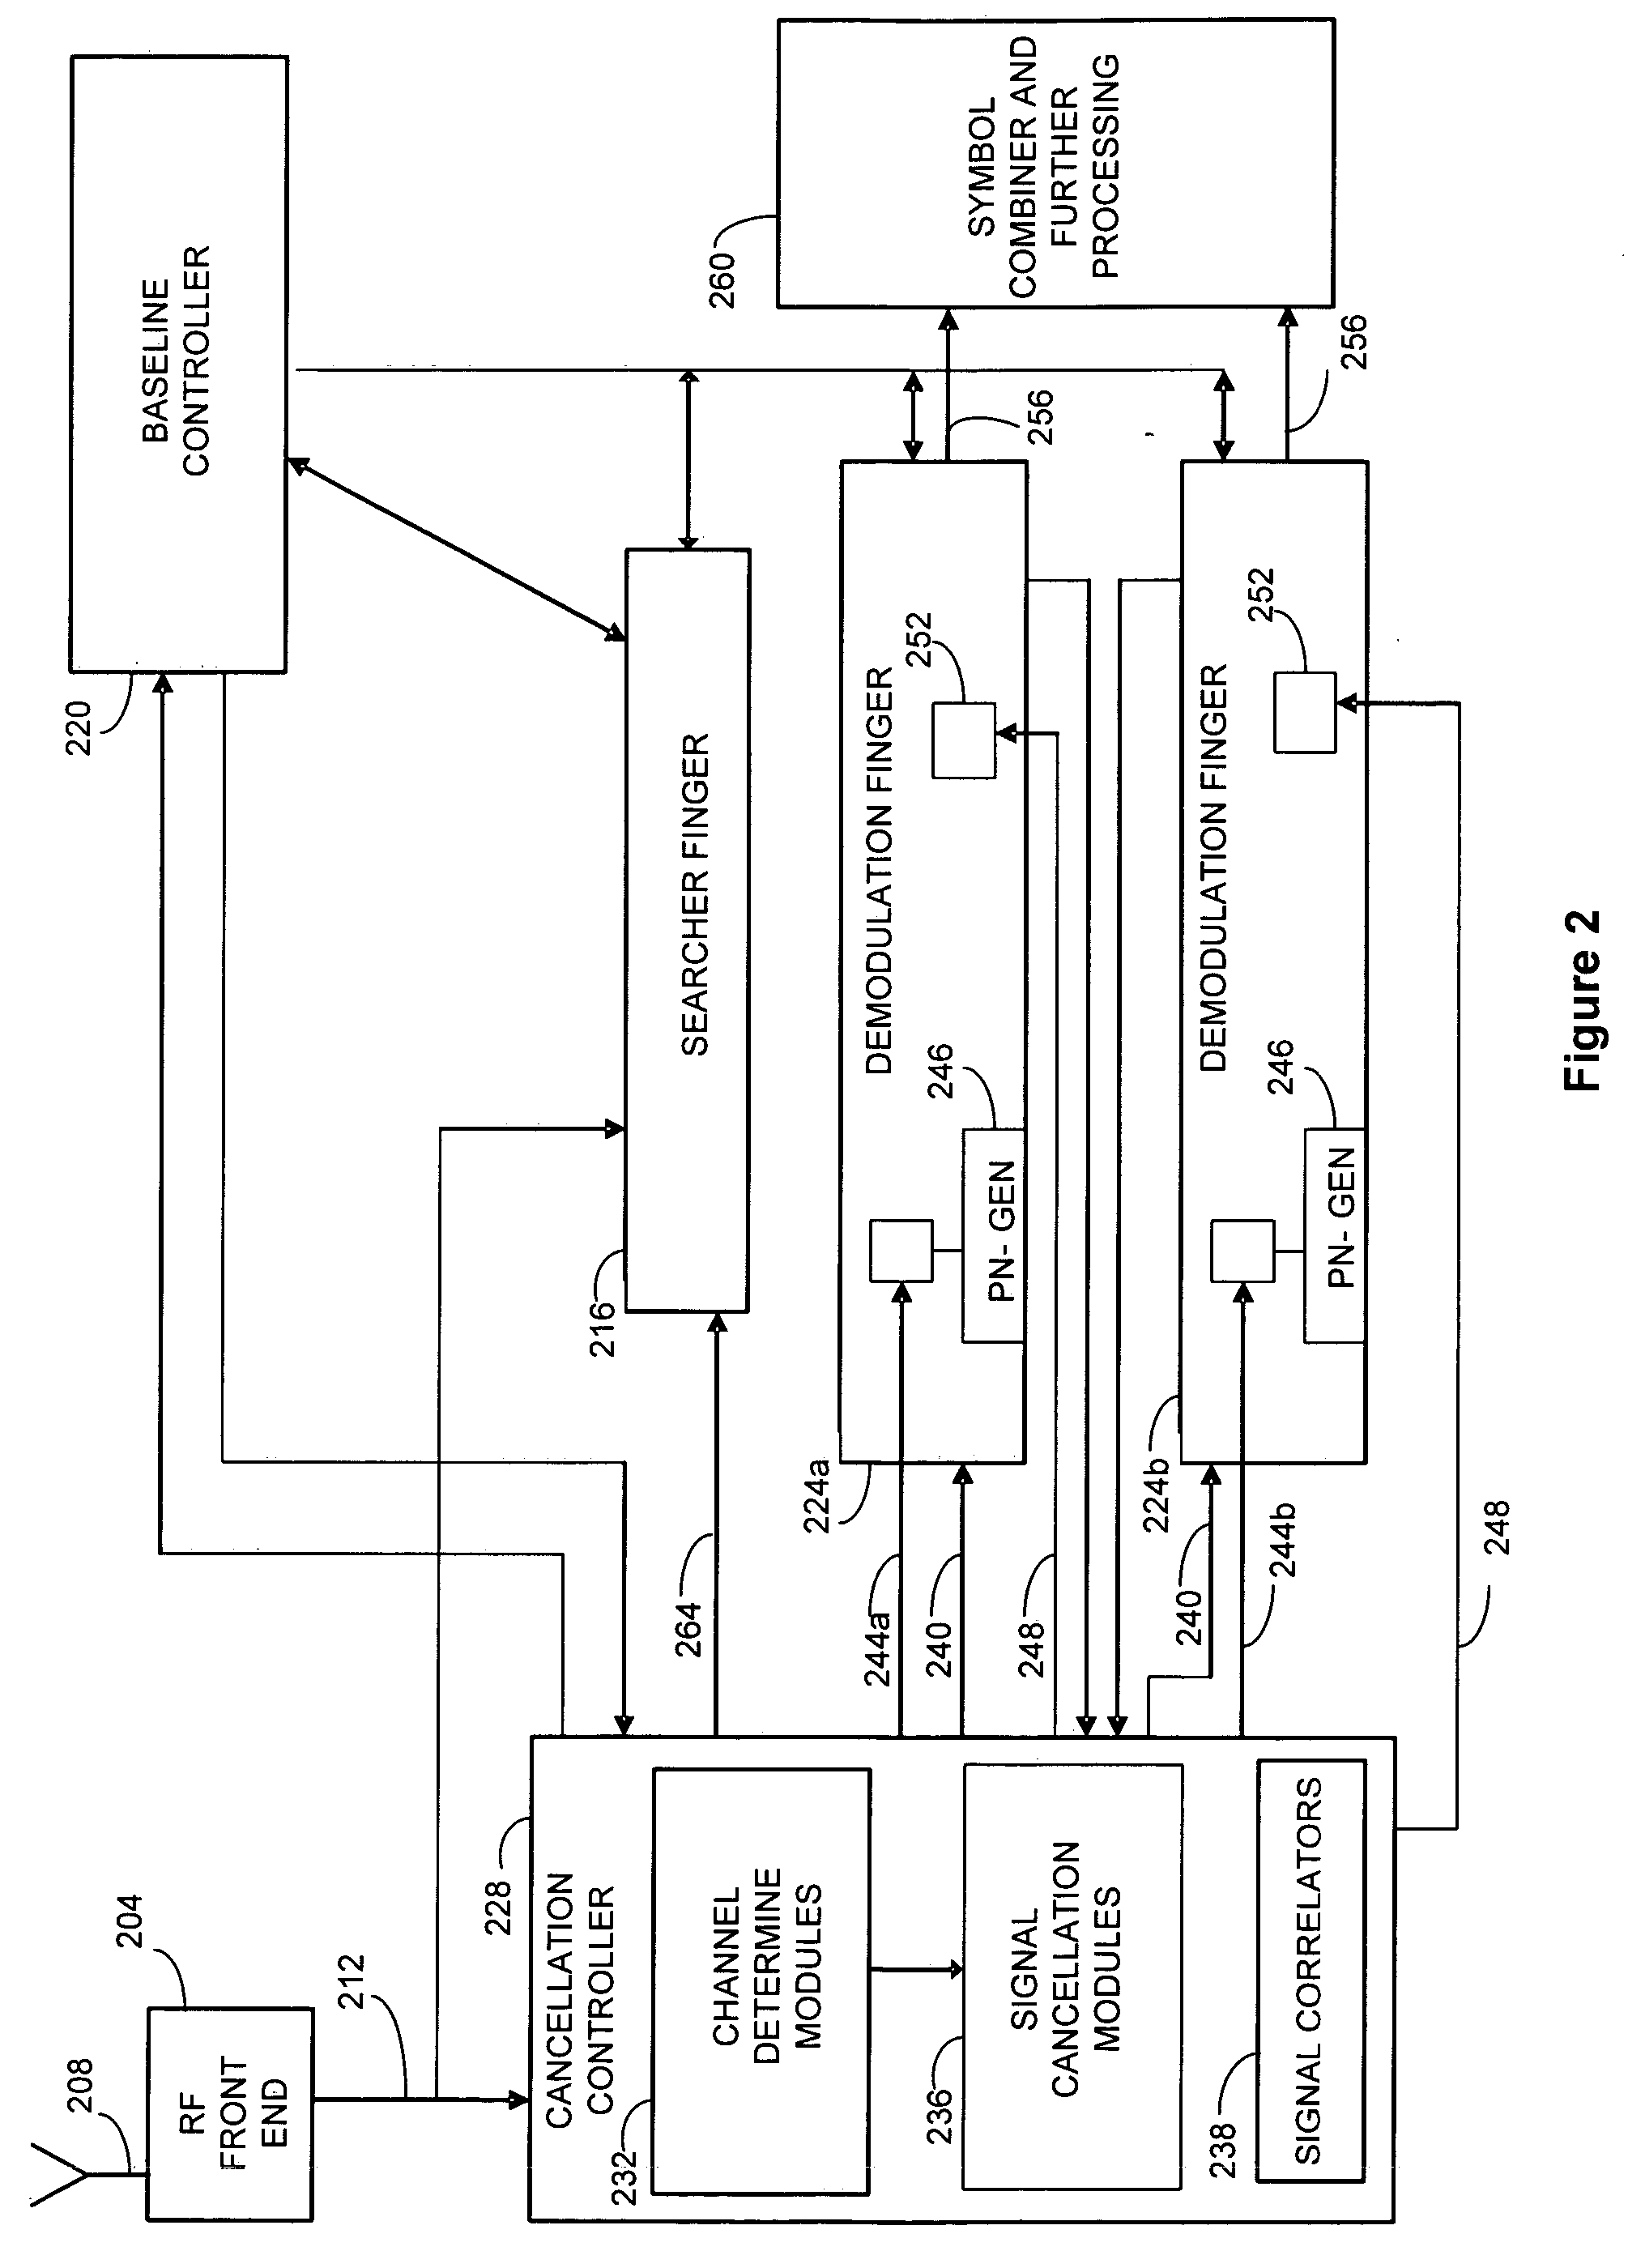 Method and apparatus for selectively applying interference cancellation in spread spectrum systems